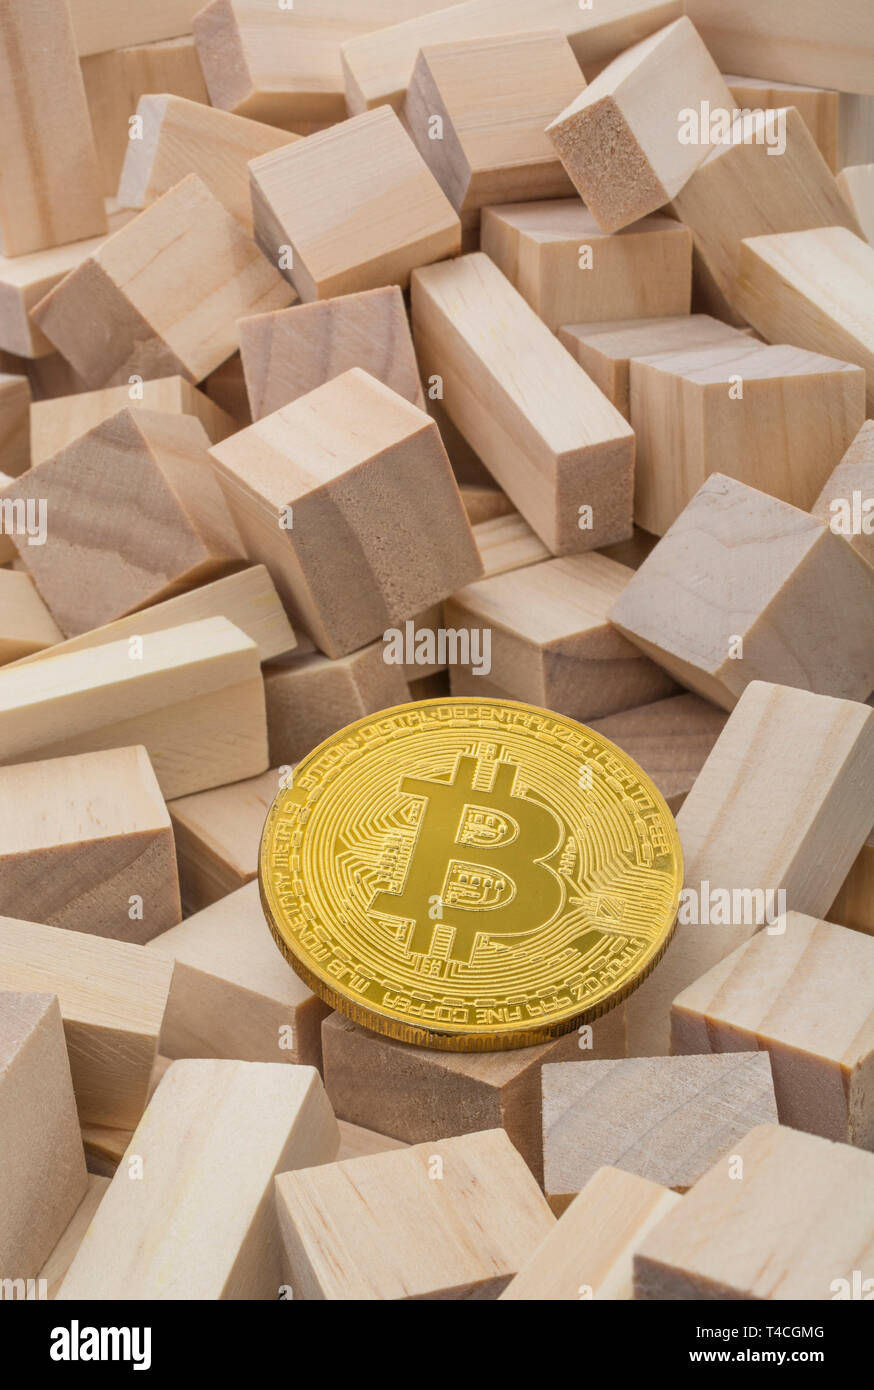 Cryptocurrency Bitcoin token on small wooden bricks -  For FTX cryptocurrency crash, Bitcoin tumbles, Bitcoin price crash, risky investments. Stock Photo